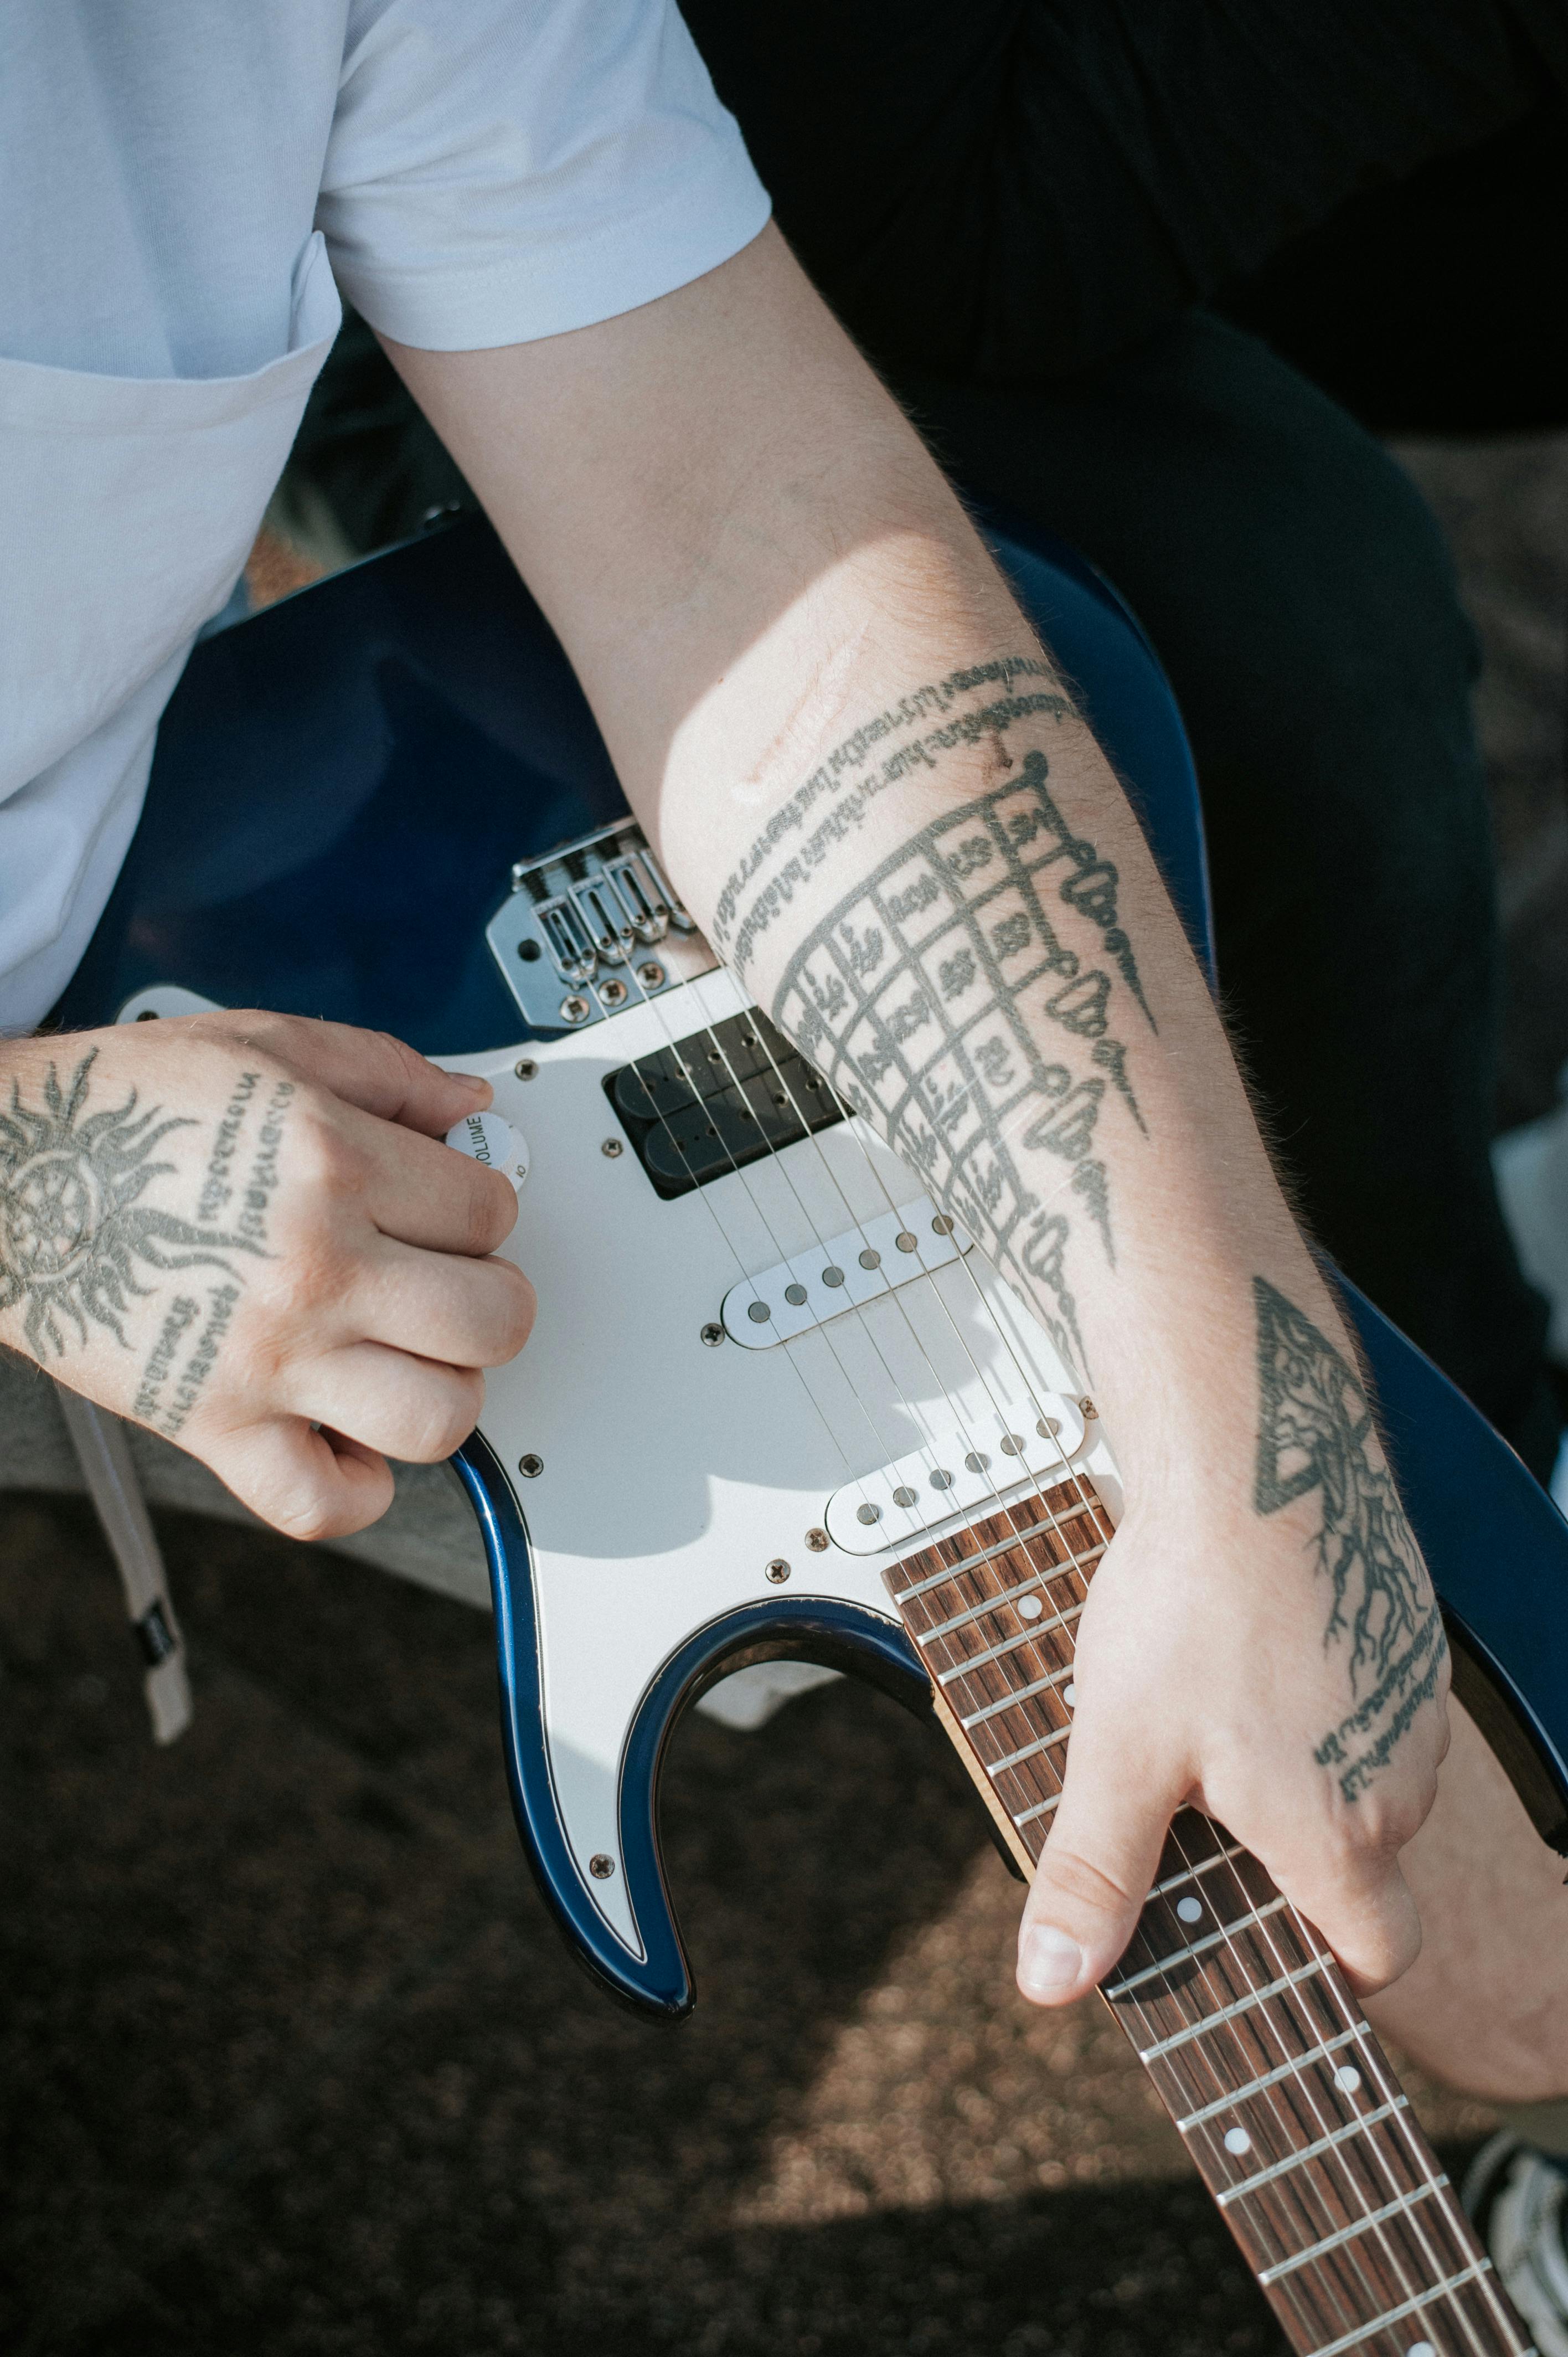 Tattoo uploaded by Jeff Wagner • Two things give me life. Music/playing  guitar and my children. #guitar #children #treeofllife • Tattoodo